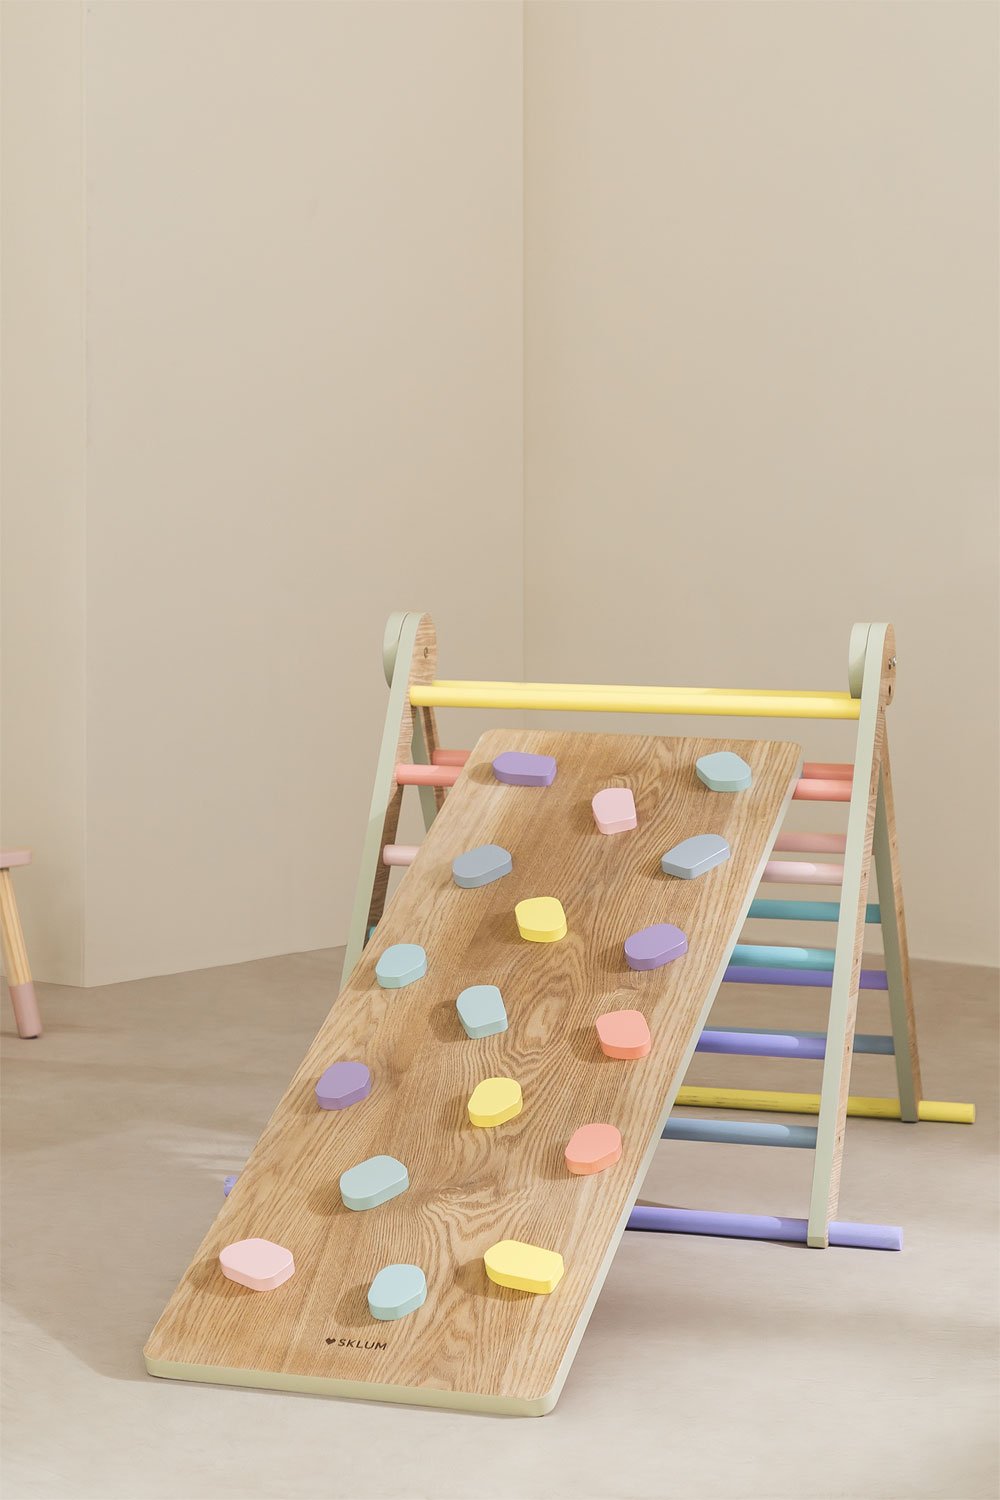 Learning Climbing Wall Ramp Pyqer Colors Kids , gallery image 1